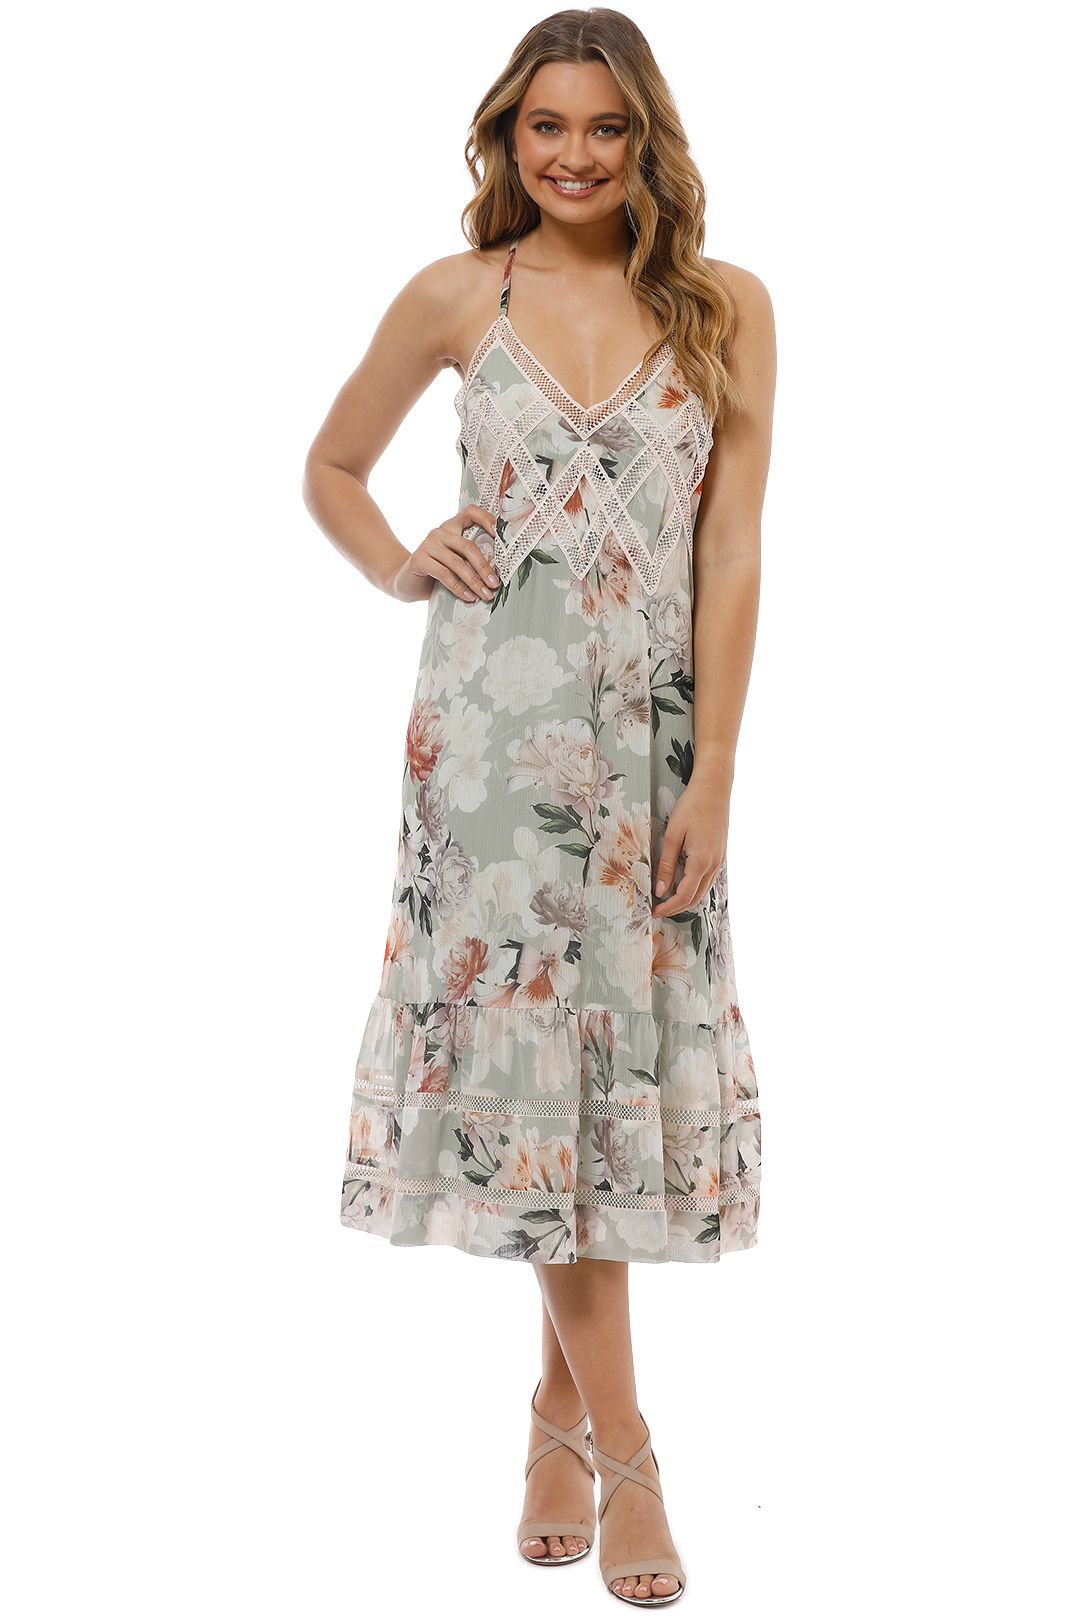 We Are Kindred - Magnolia Midi Dress - Green Floral - Front